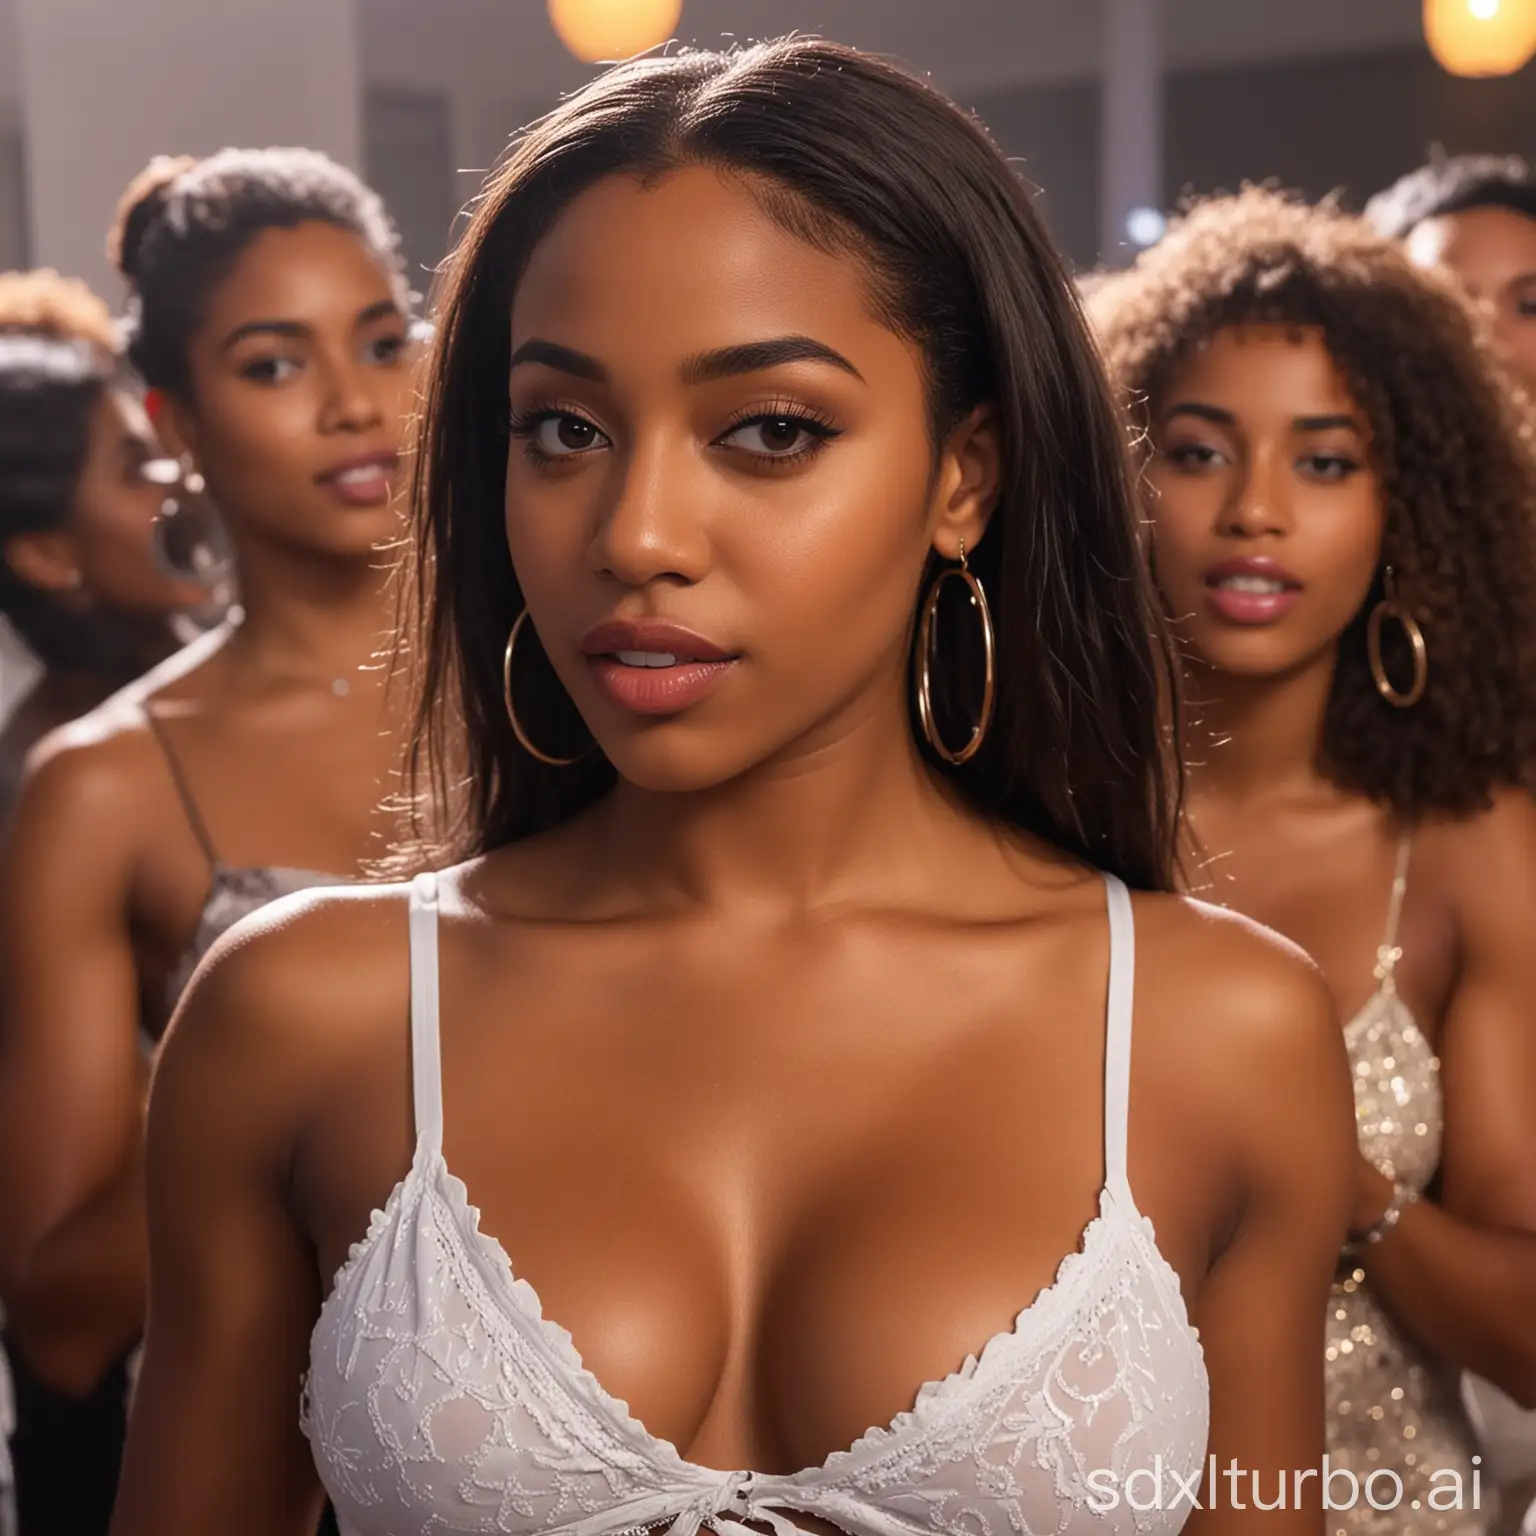 A Dominican sexy lady in a party critically observing and analysing other ebony and mulattoes' behaviour in 2023 from a wider angle with moves 30 seconds